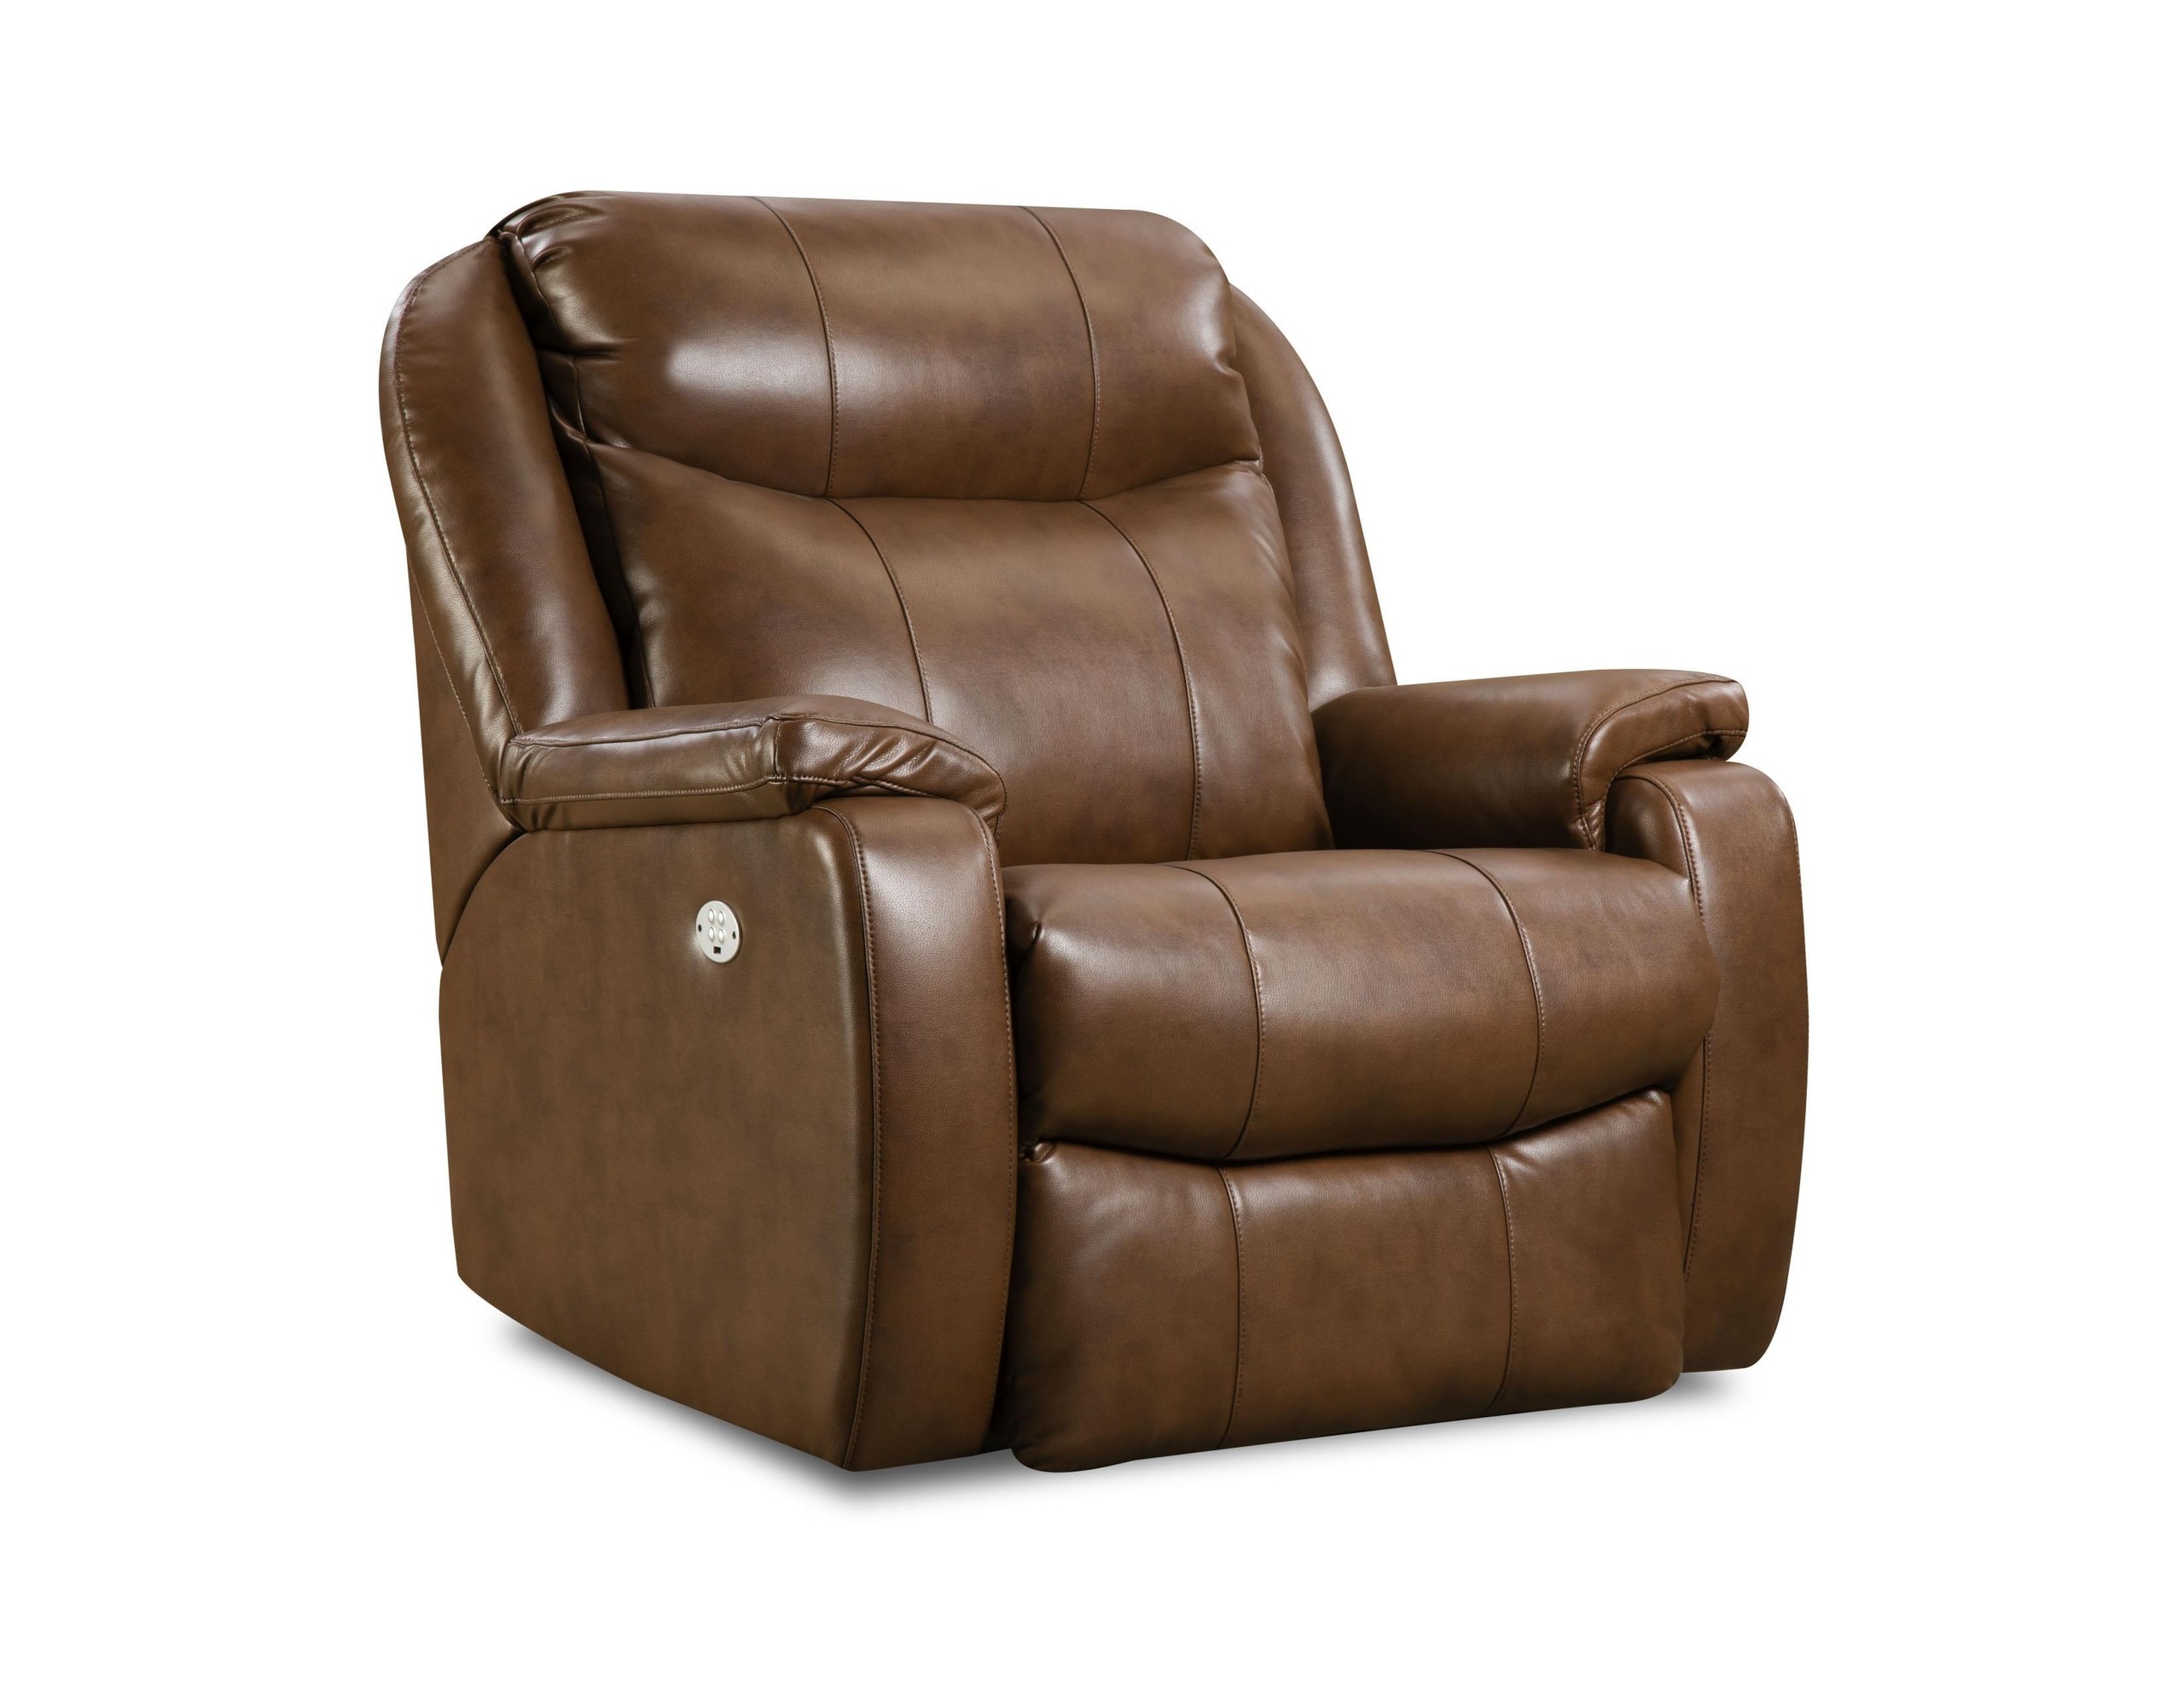 Southern motion recliners hercules big mans power